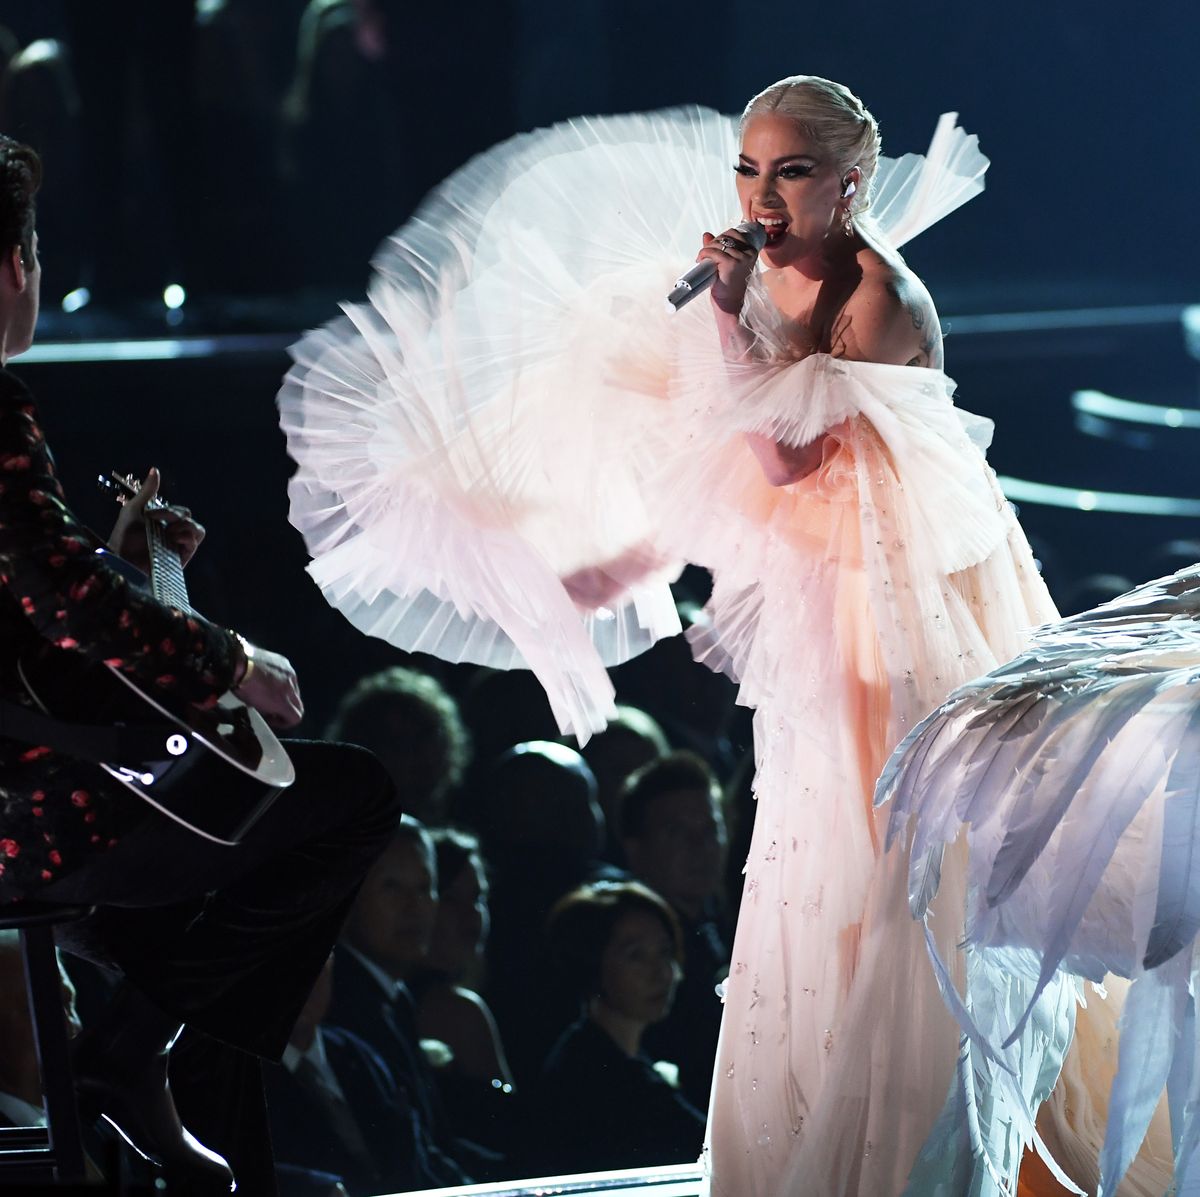 Grammys: Lady Gaga's Joanne upset victory was 4 years ago - GoldDerby